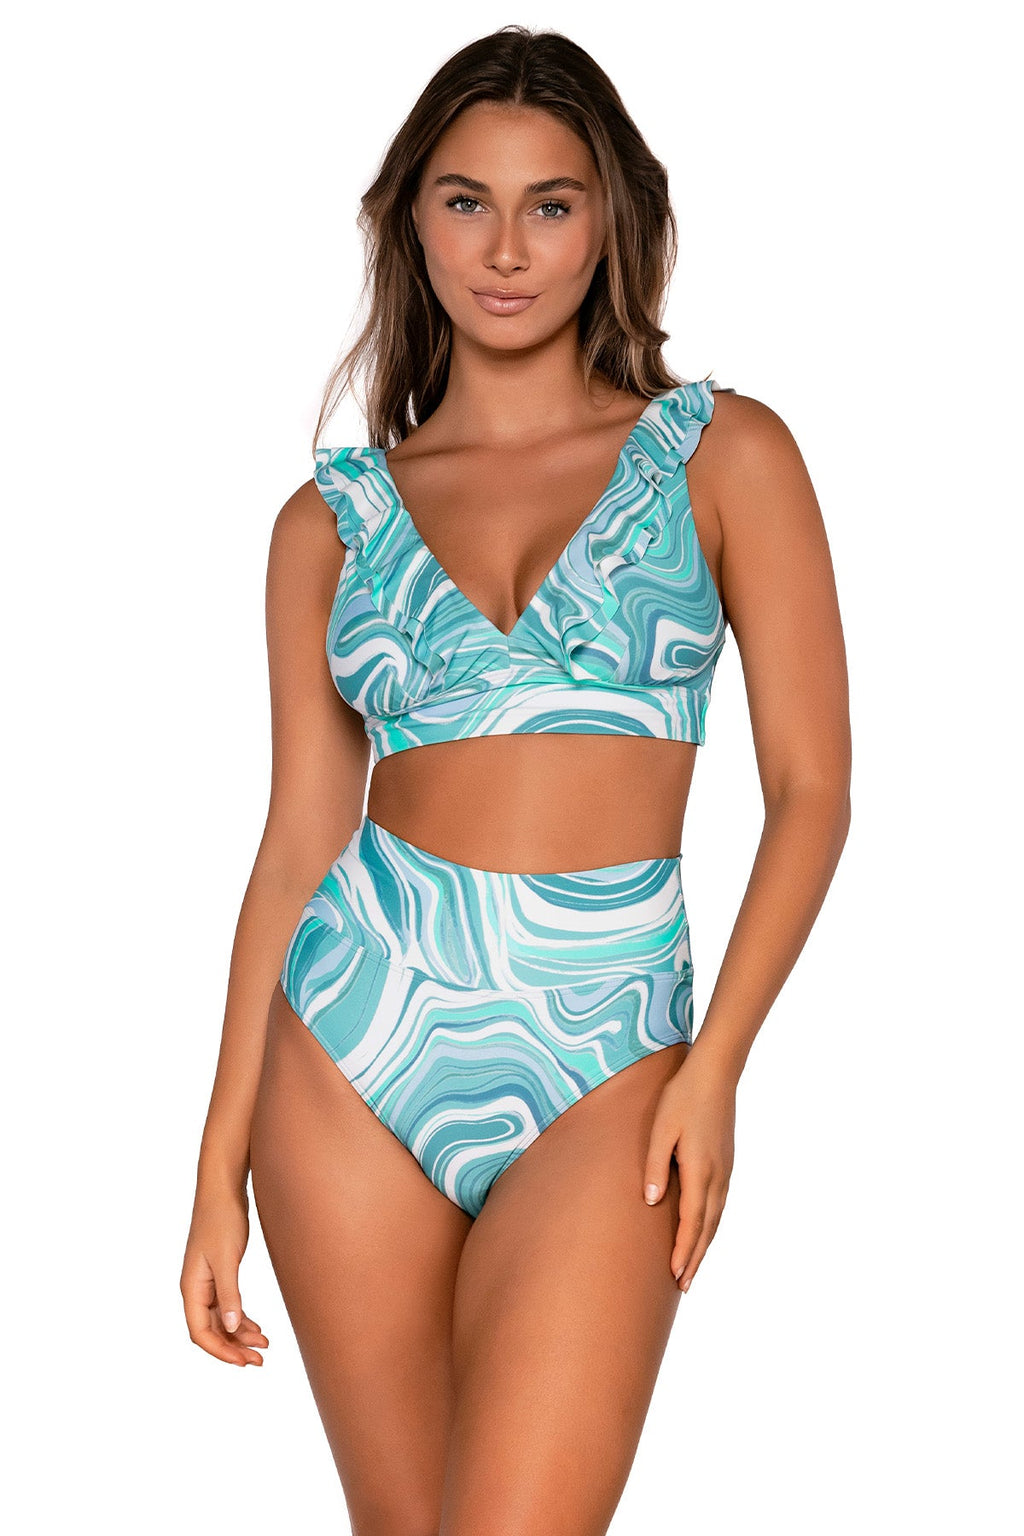 Buy Sunsets Swimwear: Swimsuits & Bathing Suits for Women